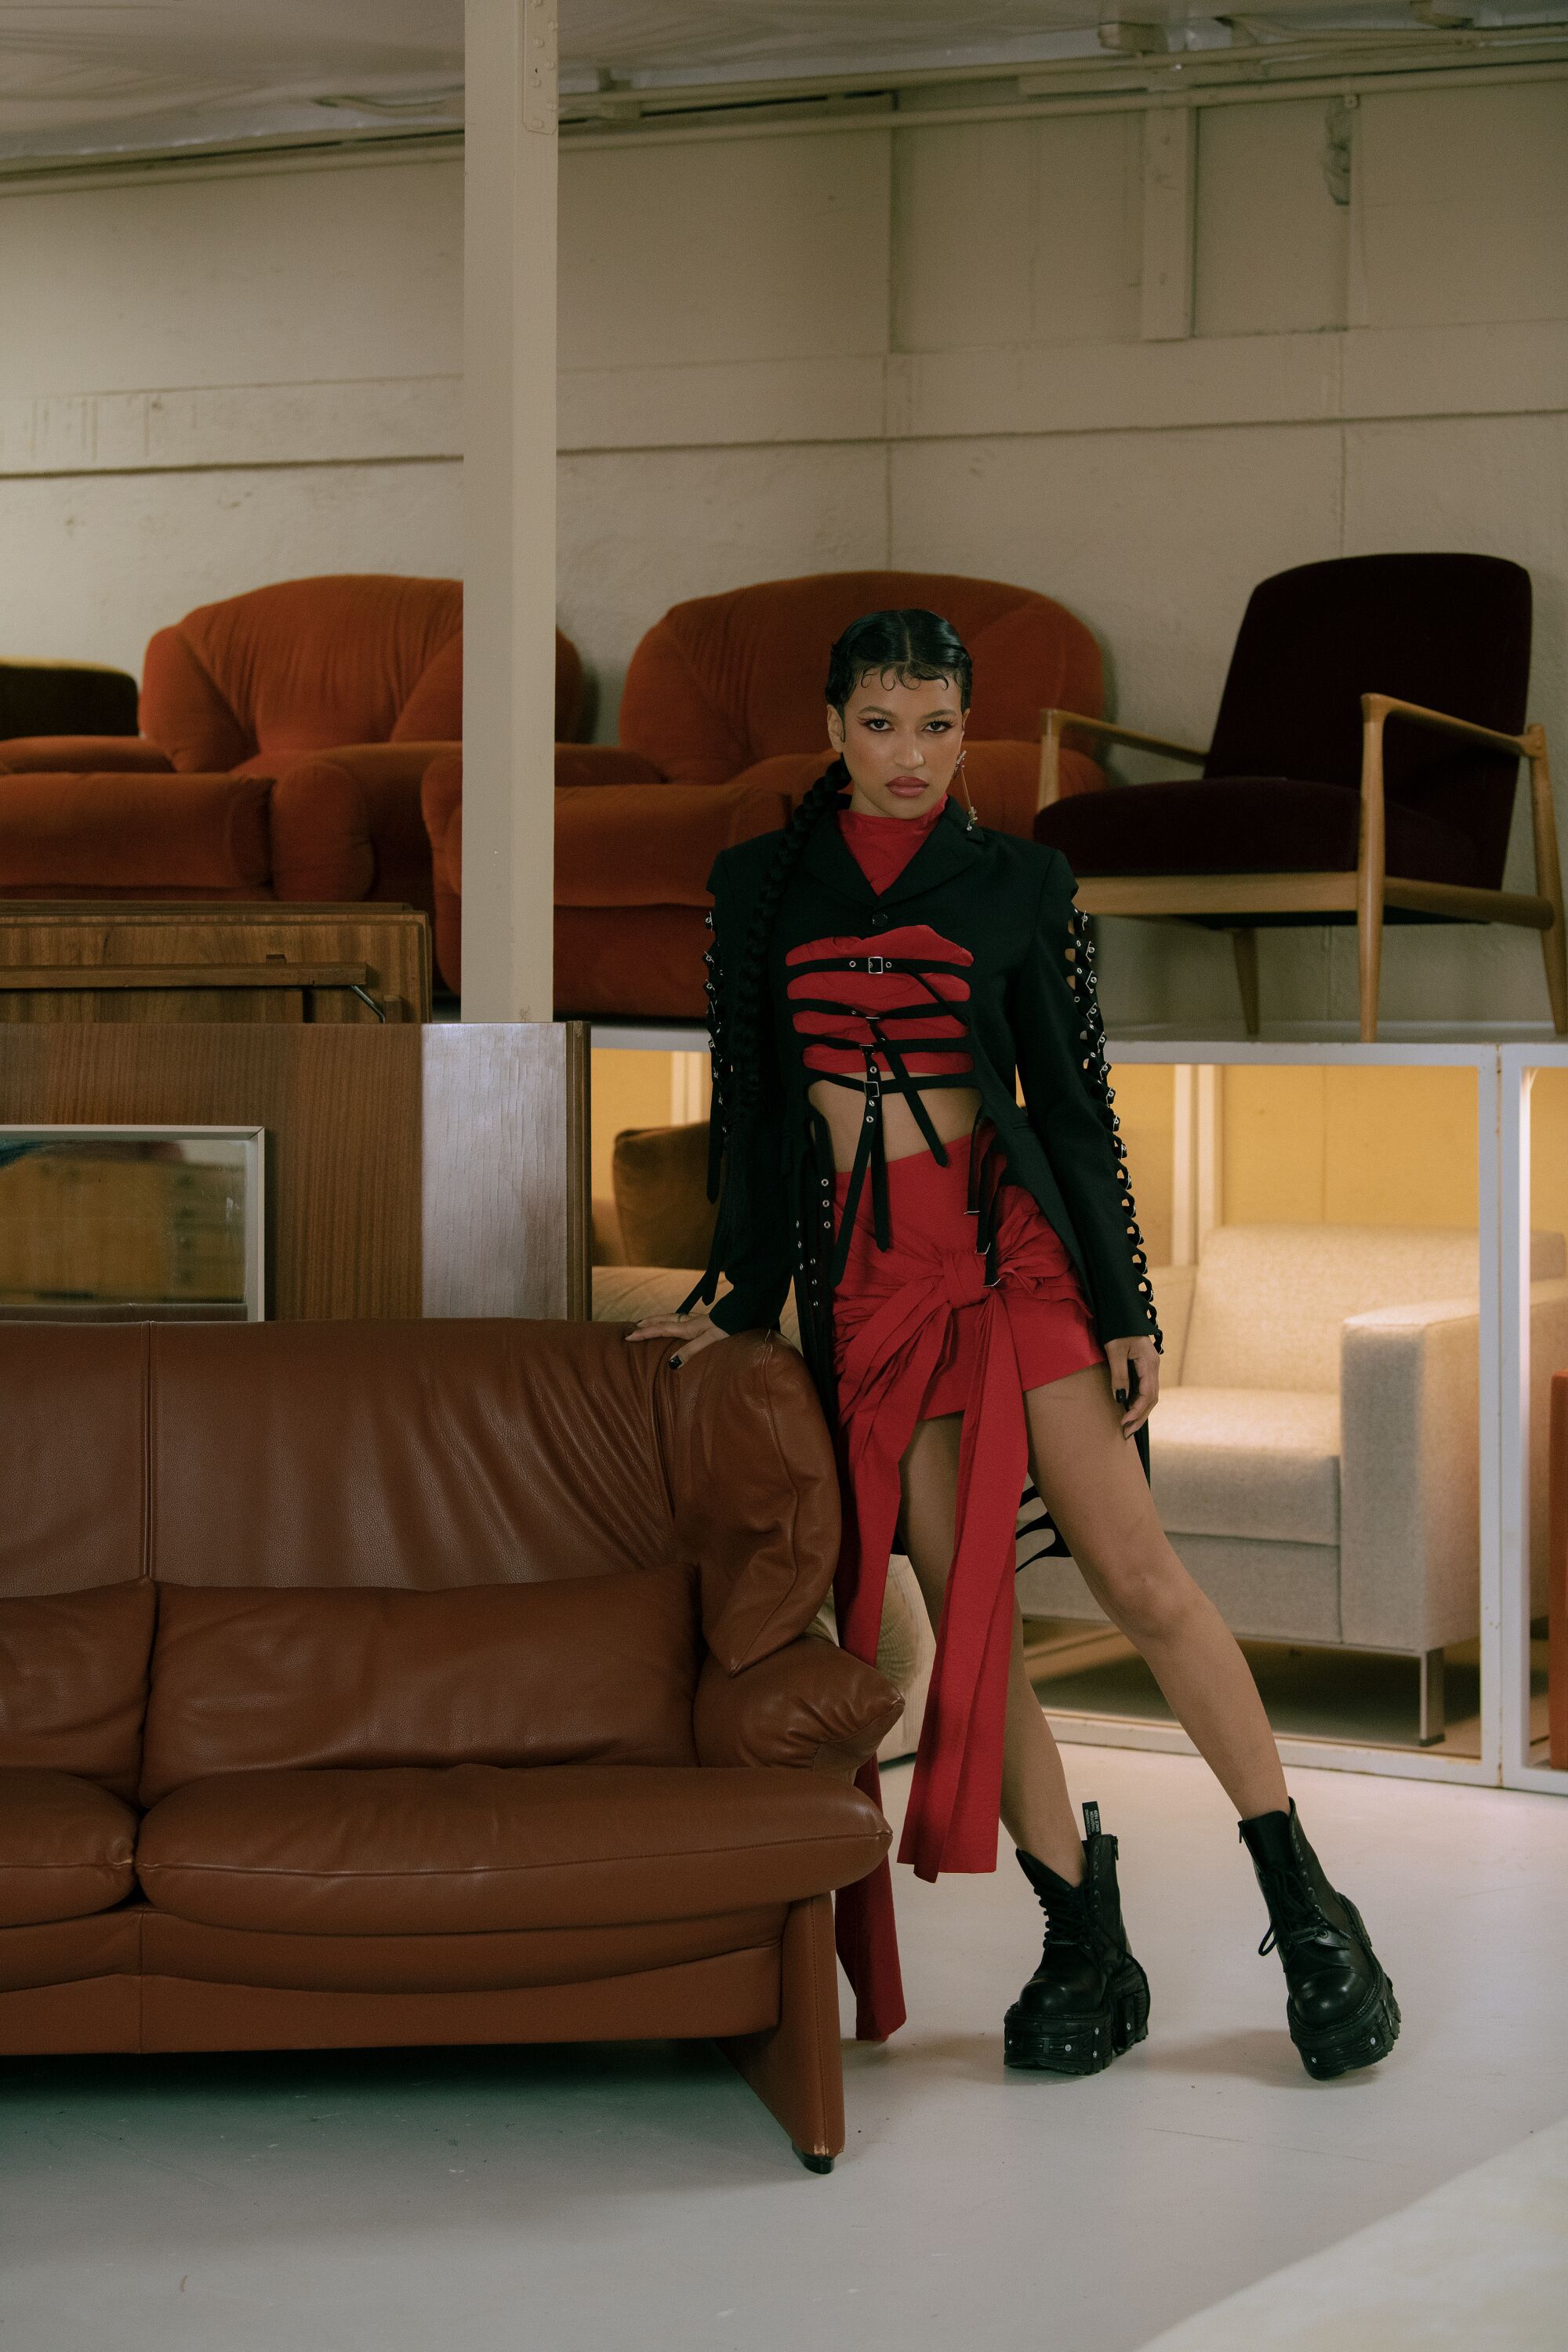 A model wearing a red and black dress leans against a brown leather couch.